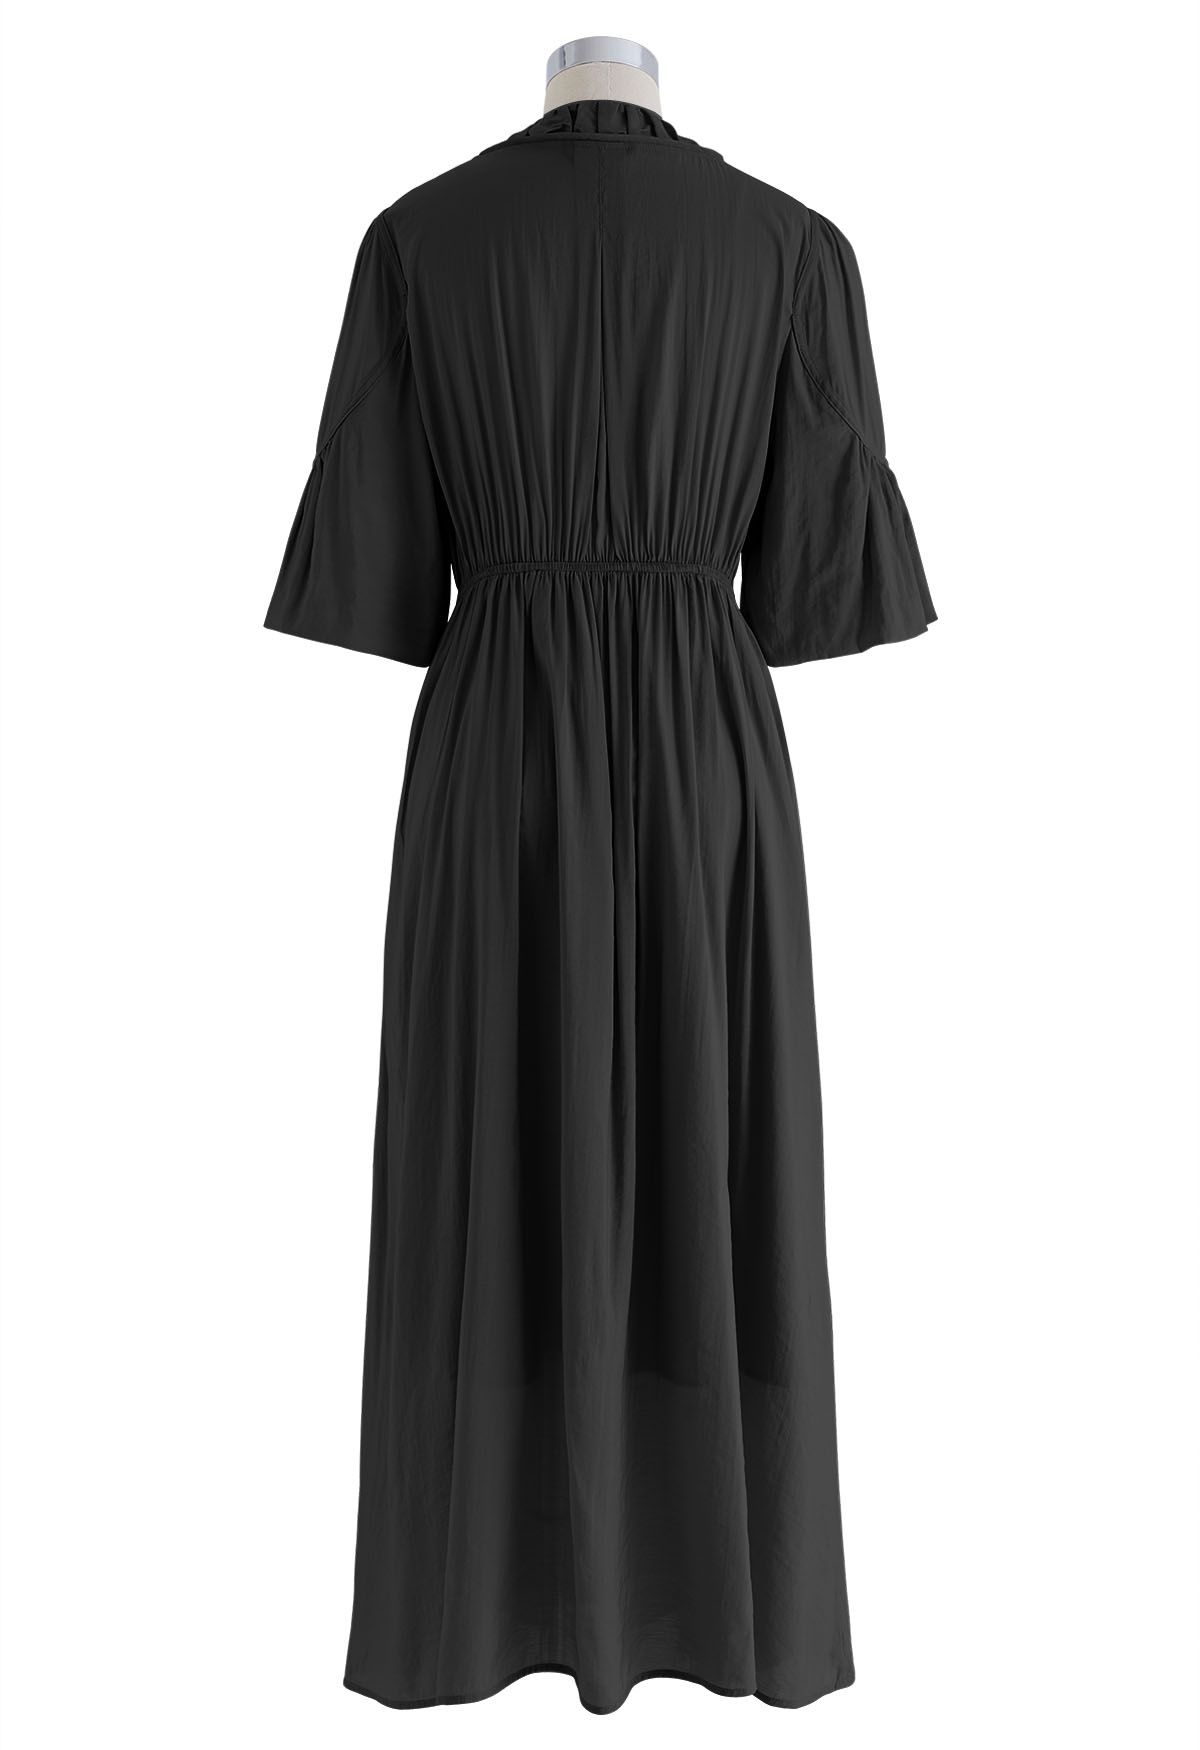 Ruched V-Neck Flutter Sleeves Midi Dress in Black - Retro, Indie and ...